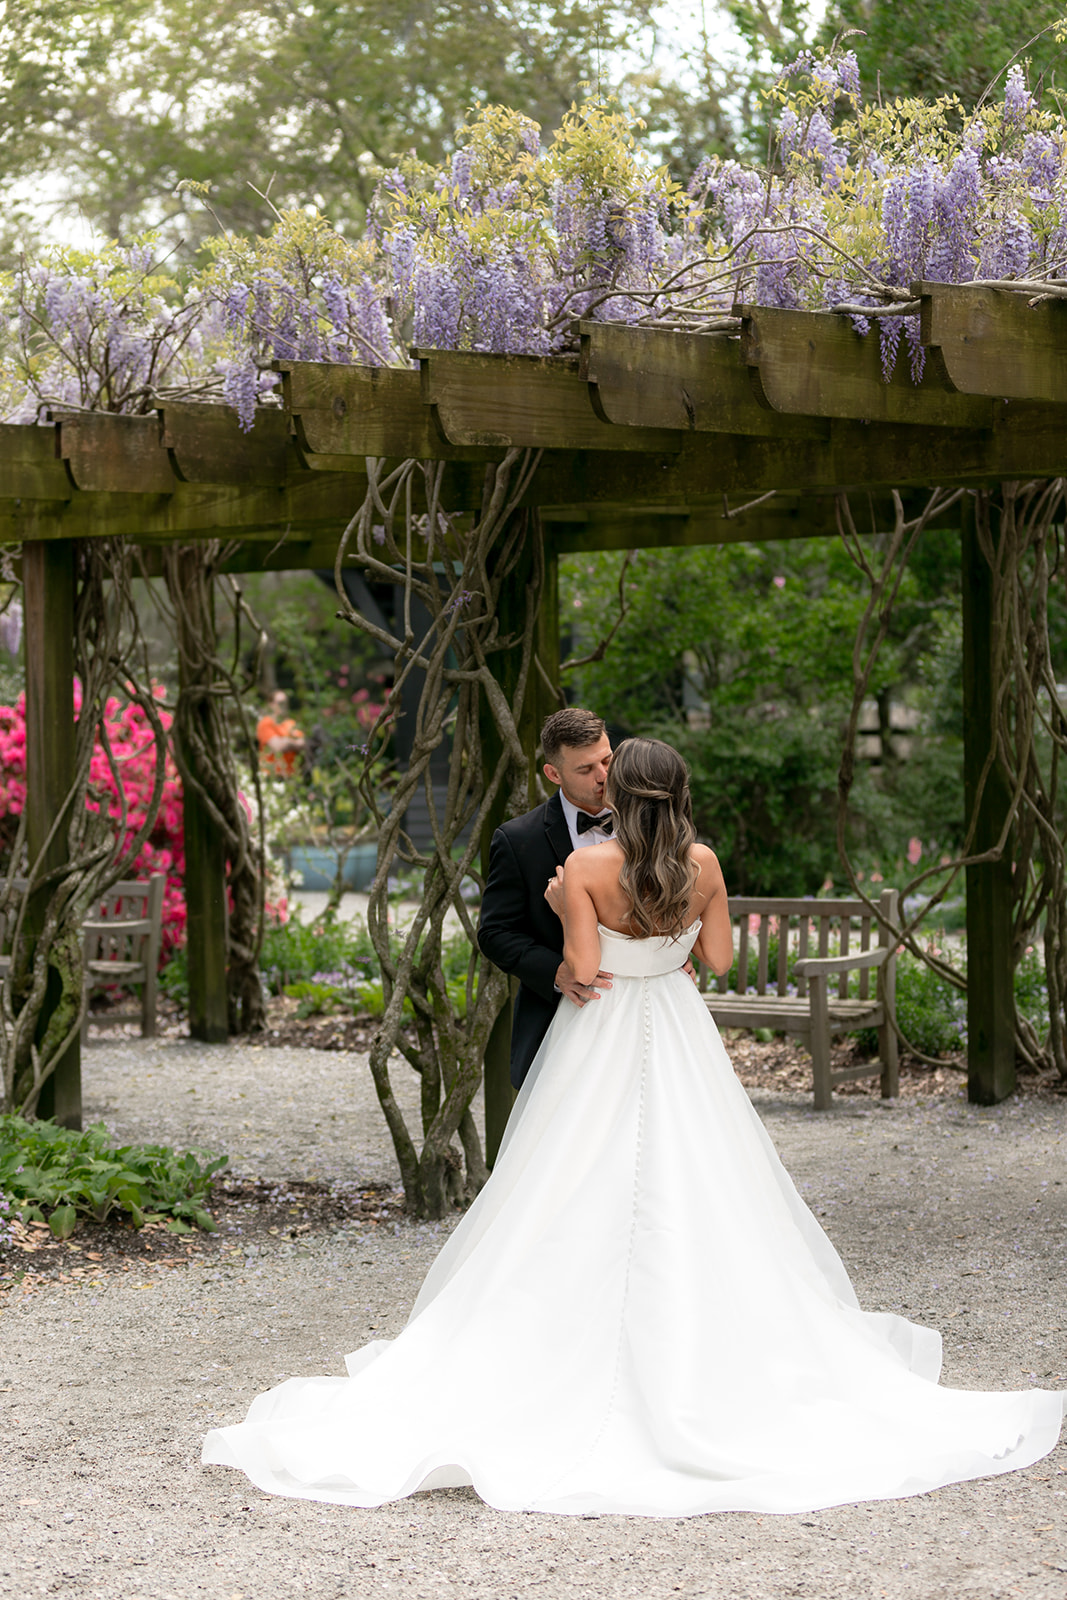 Couple portraits taken at Magnolia Plantation Wedding surrounded by colorful flowers.